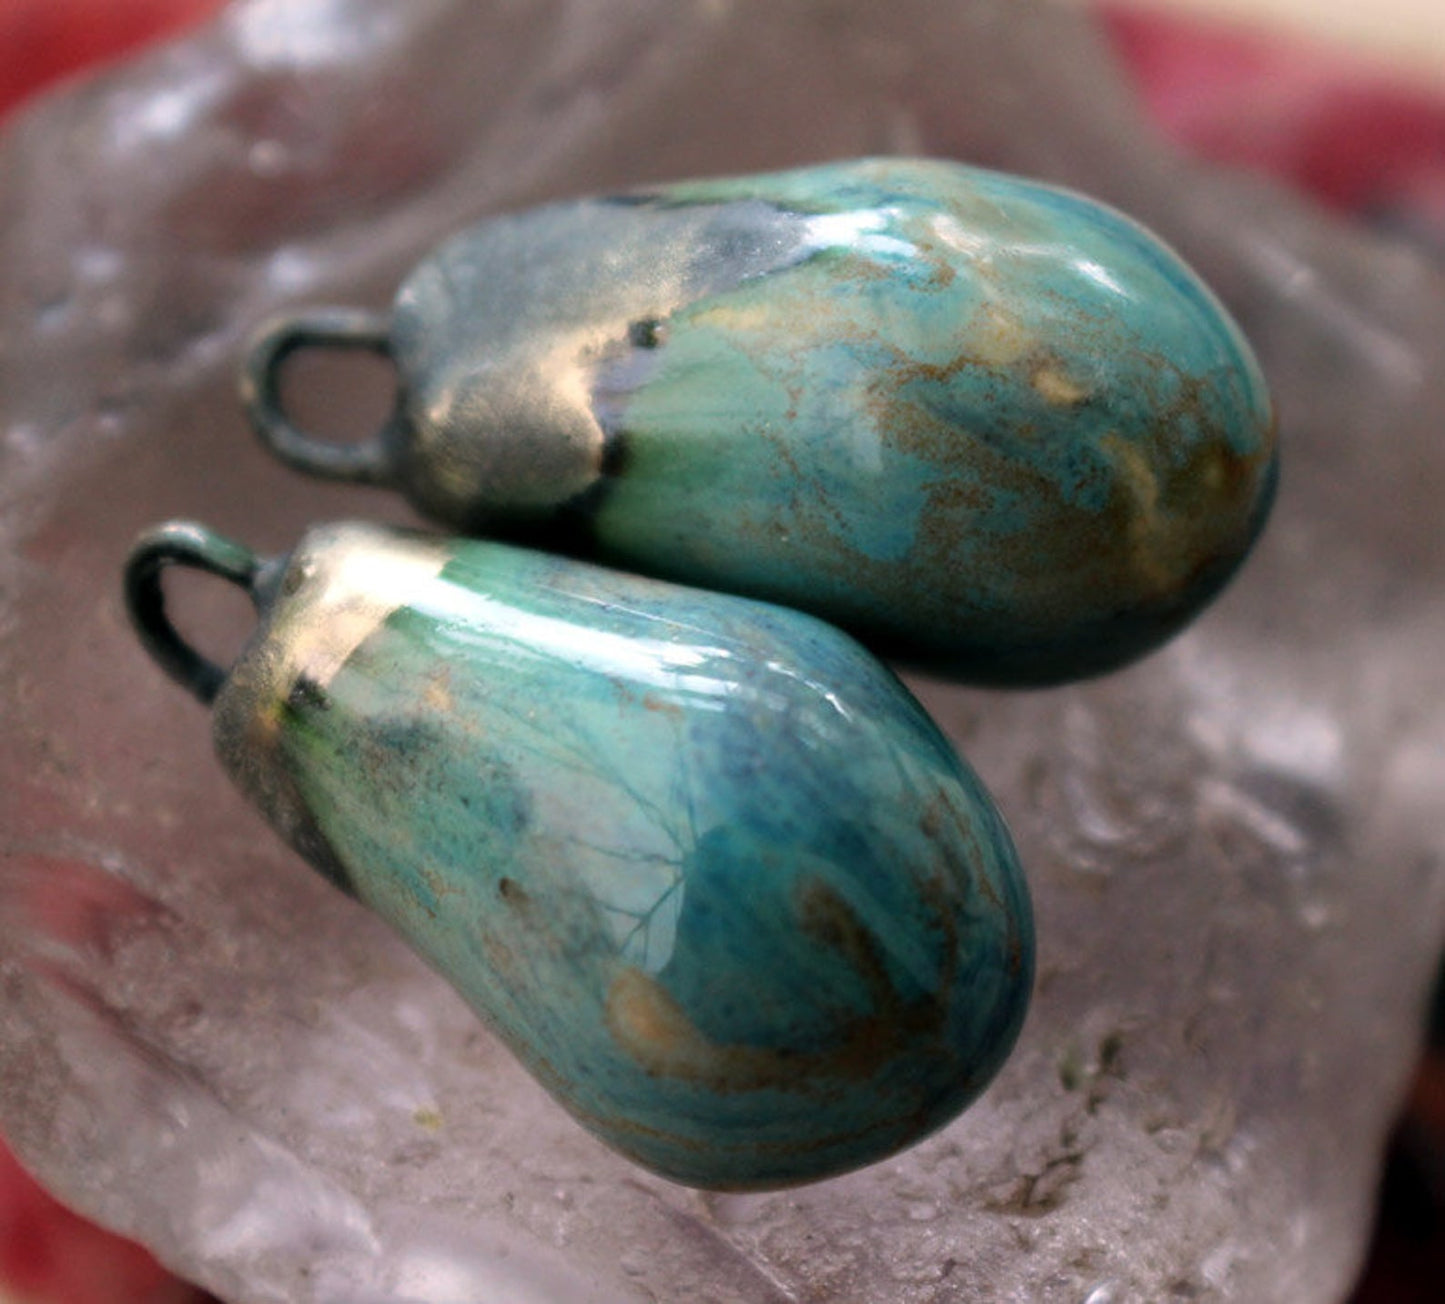 Ceramic Drops Earring Charms -Blue Agate